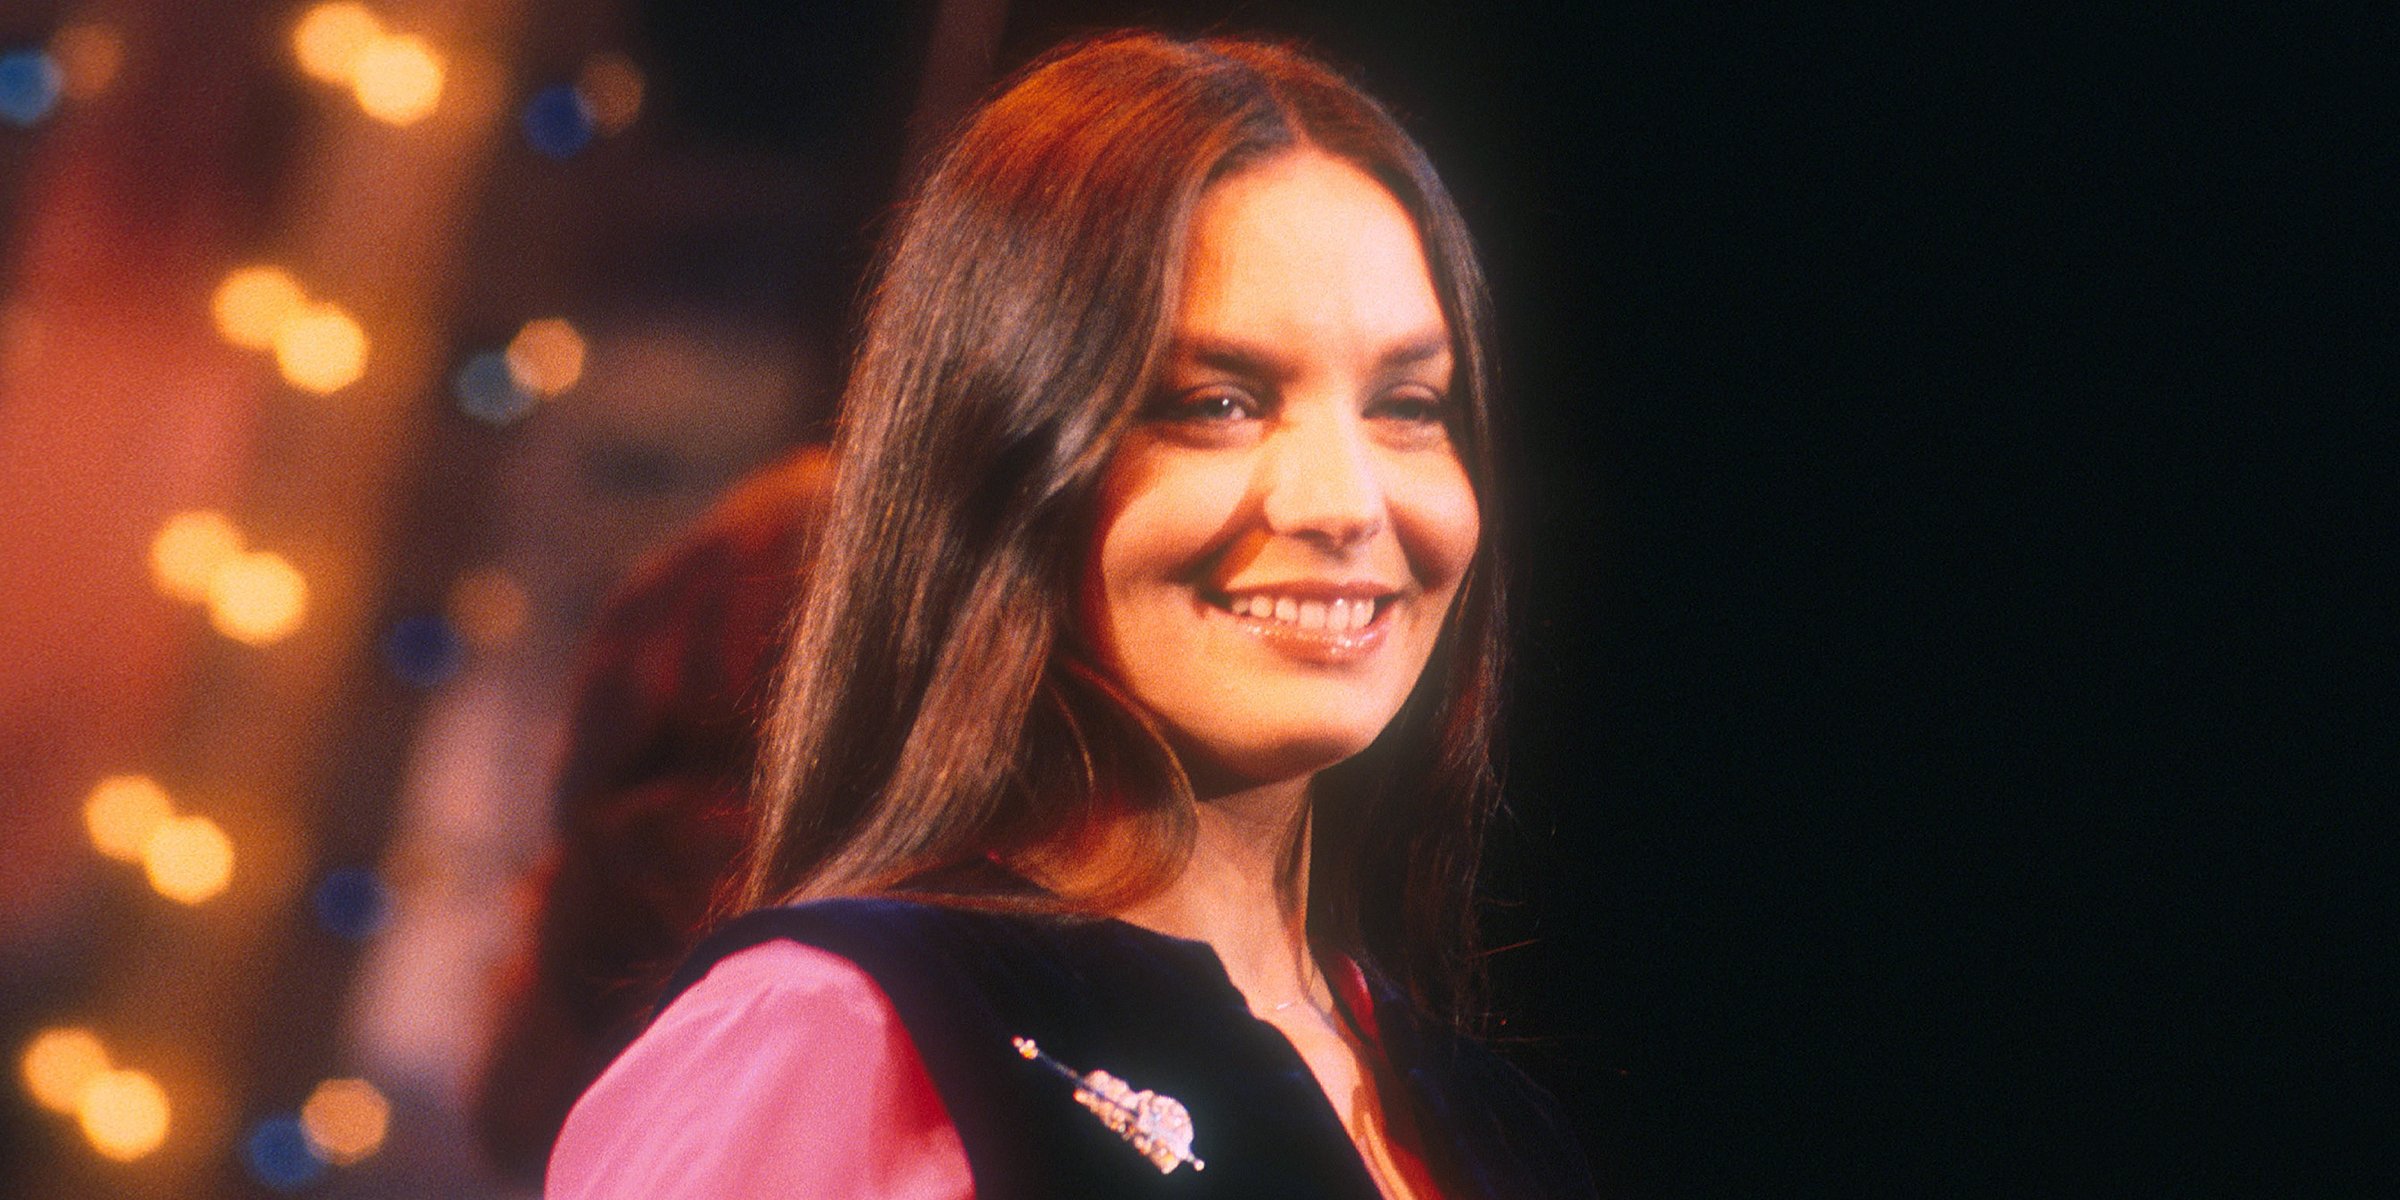 Crystal Gayle┃Source: Getty Images